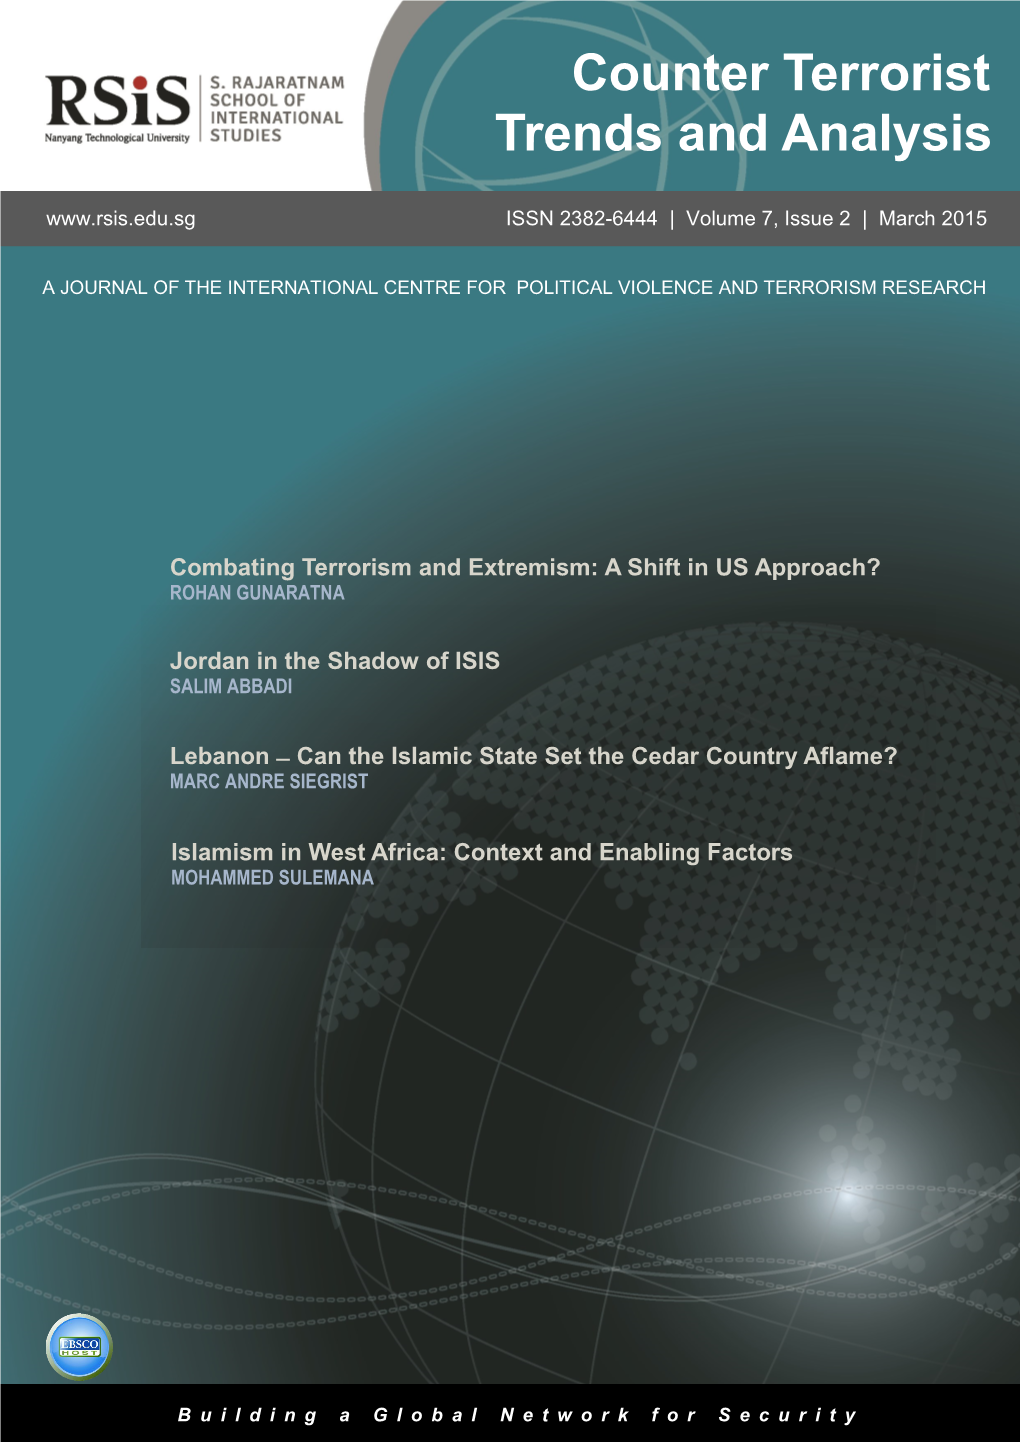 Counter Terrorist Trends and Analysis ISSN 2382-6444 | Volume 7, Issue 2 | March 2015